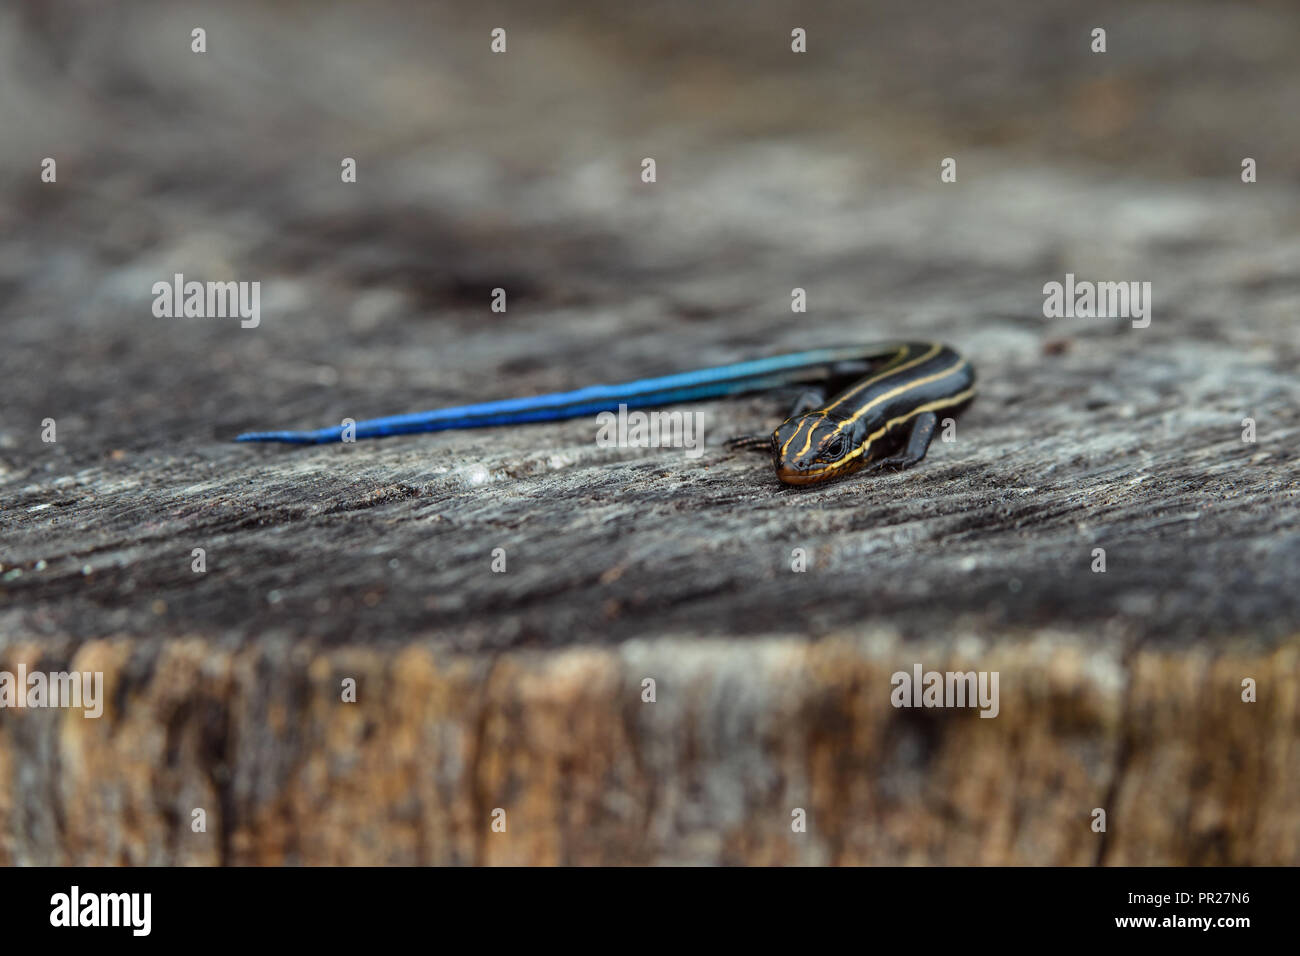 Juvenile five-lined skink on tree stump. It is a species of lizard endemic to North America and one of the most common lizards in the eastern U.S. Stock Photo